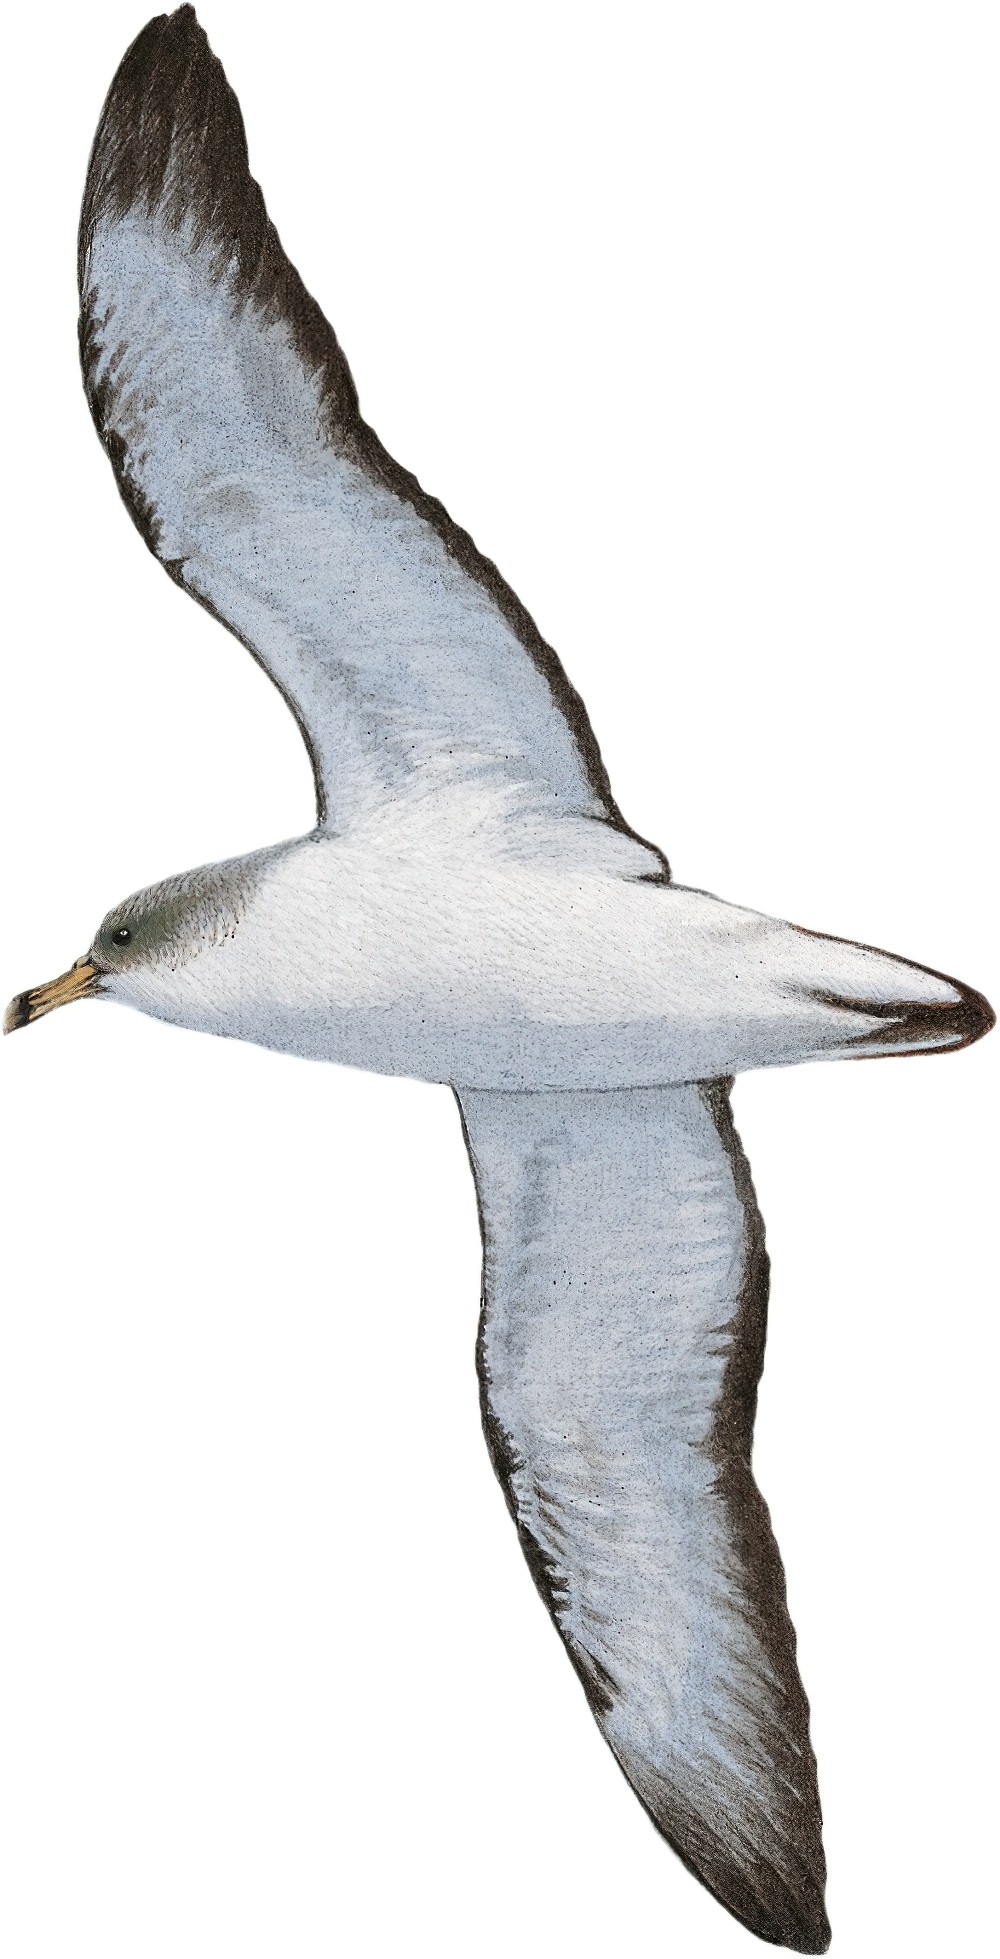 Cory\'s Shearwater / Calonectris diomedea